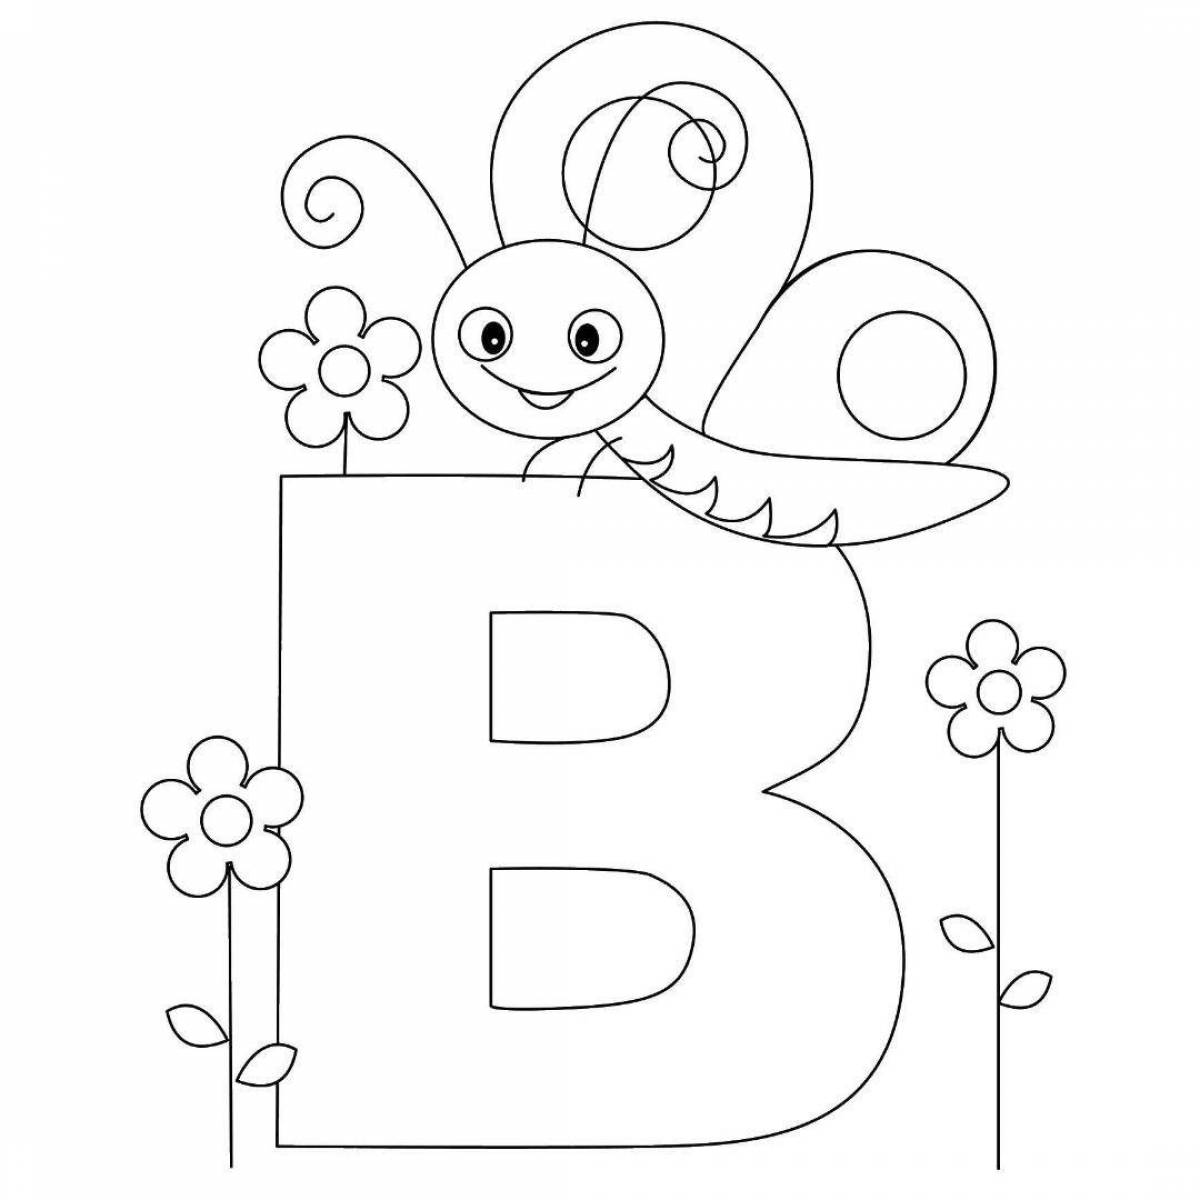 Bright letter in lovely coloring page